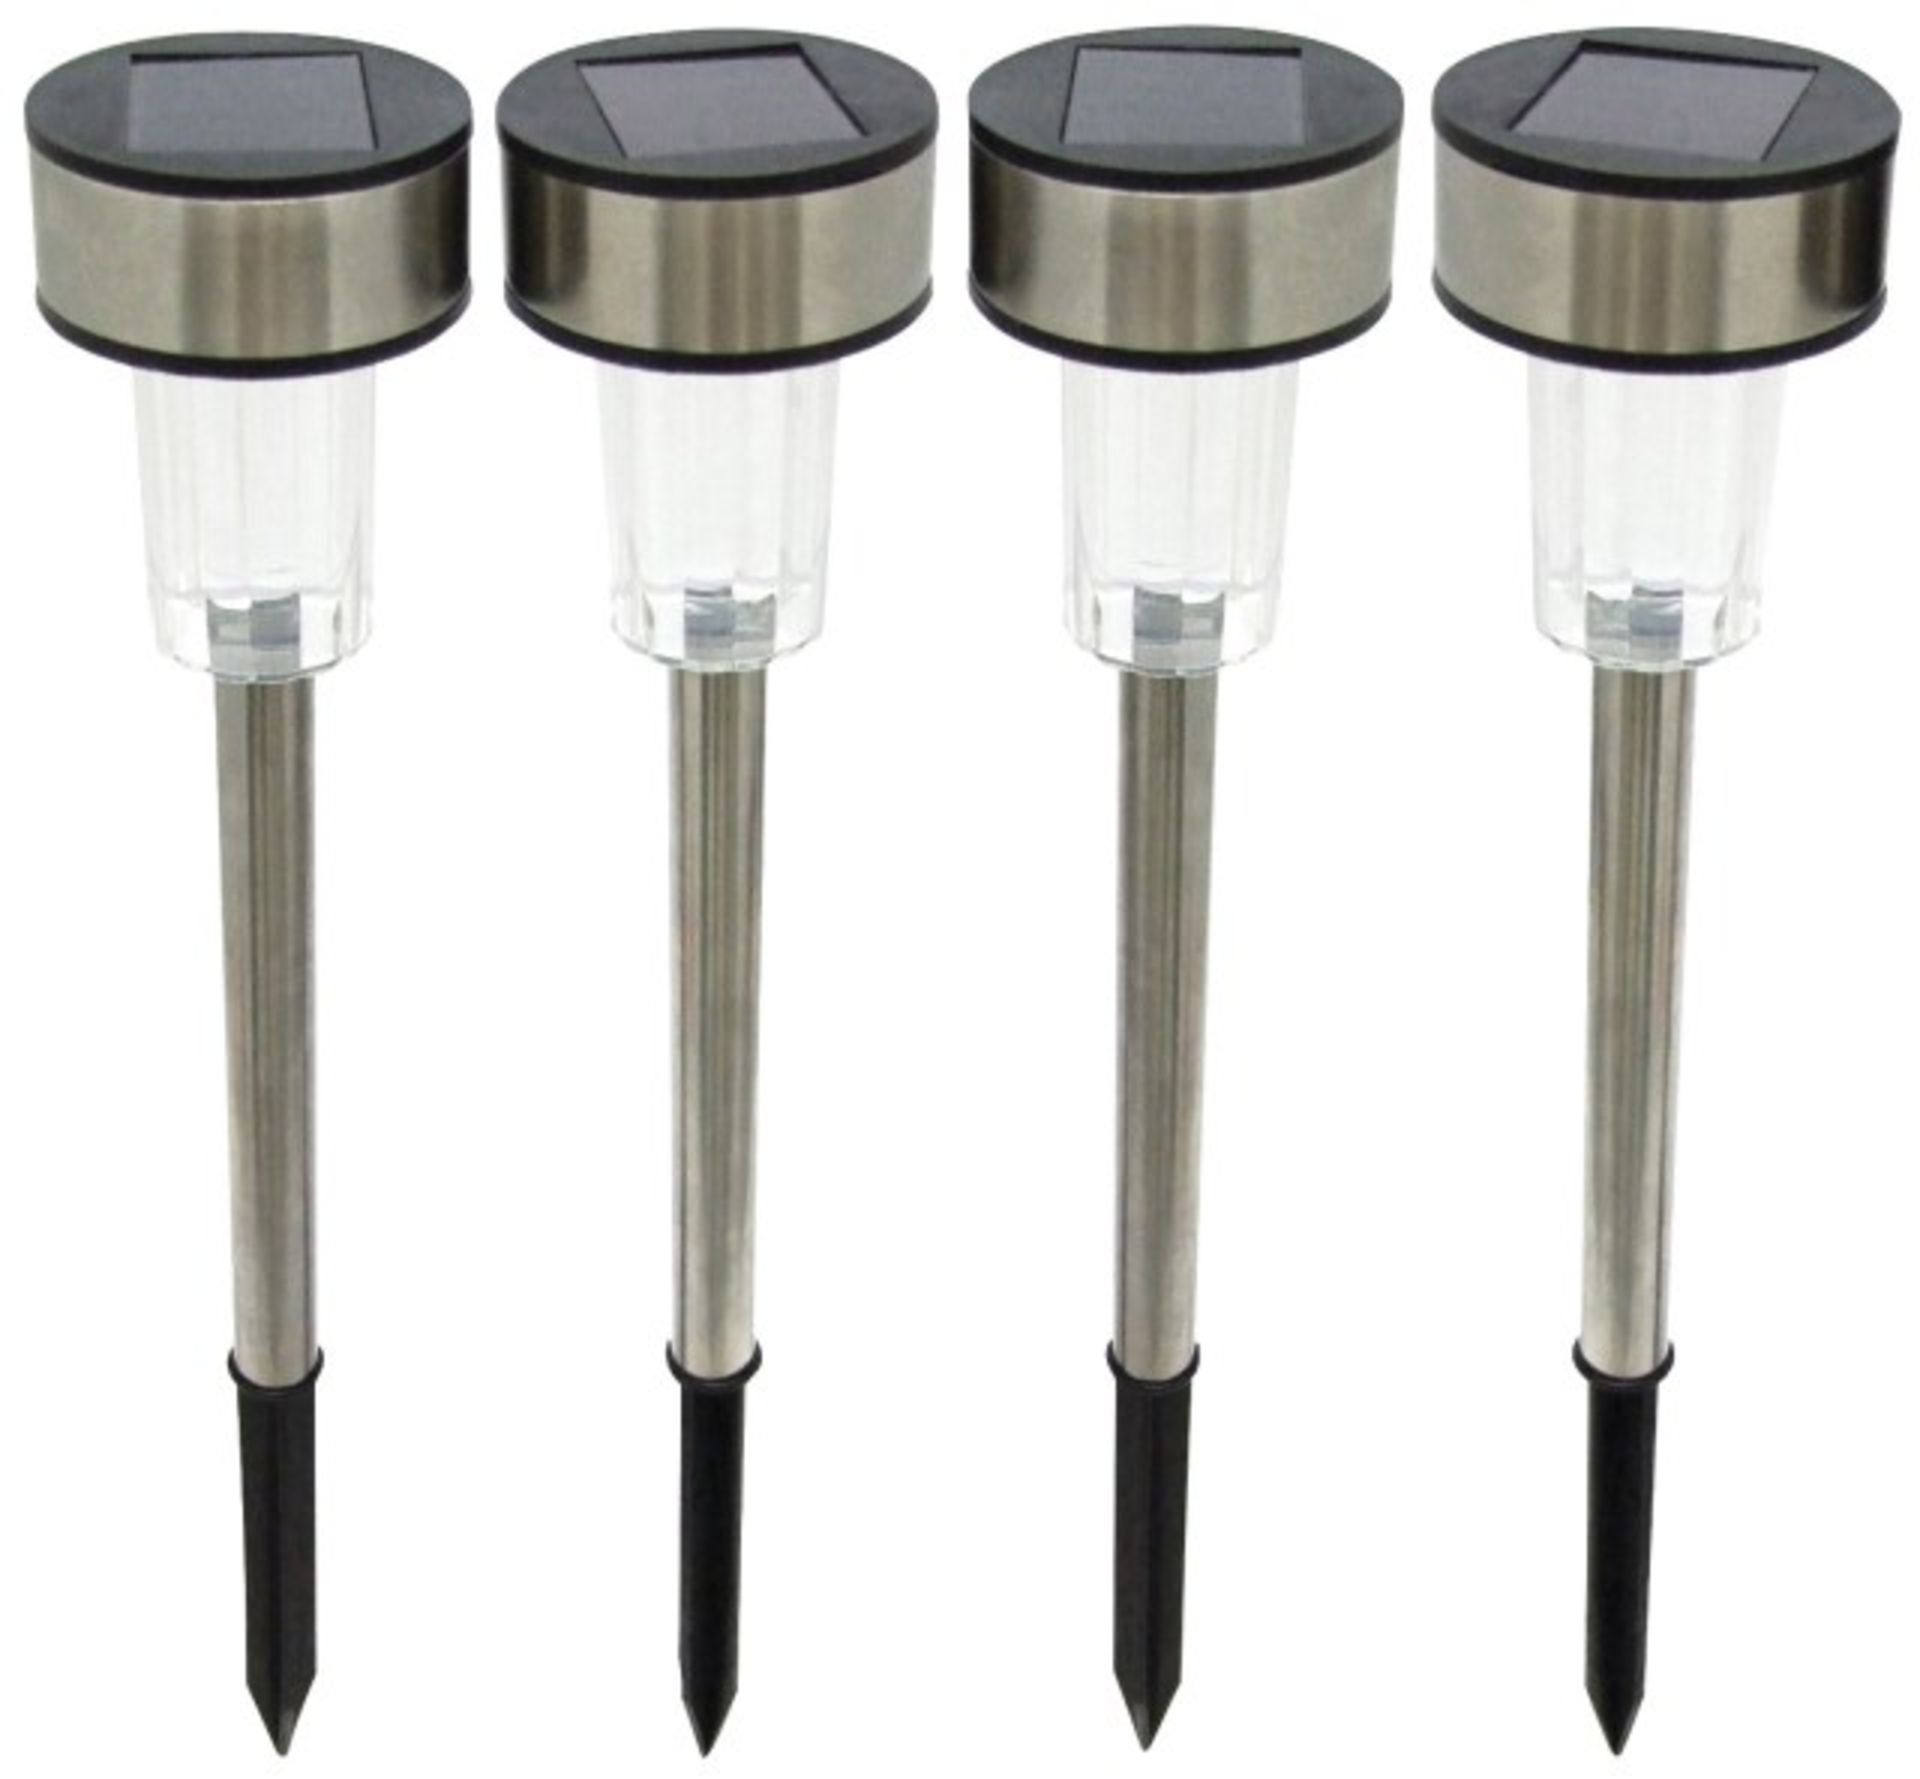 V *TRADE QTY* Brand New Set Of 4 Kempton Stainless Steel Solar Lights X 3 YOUR BID PRICE TO BE